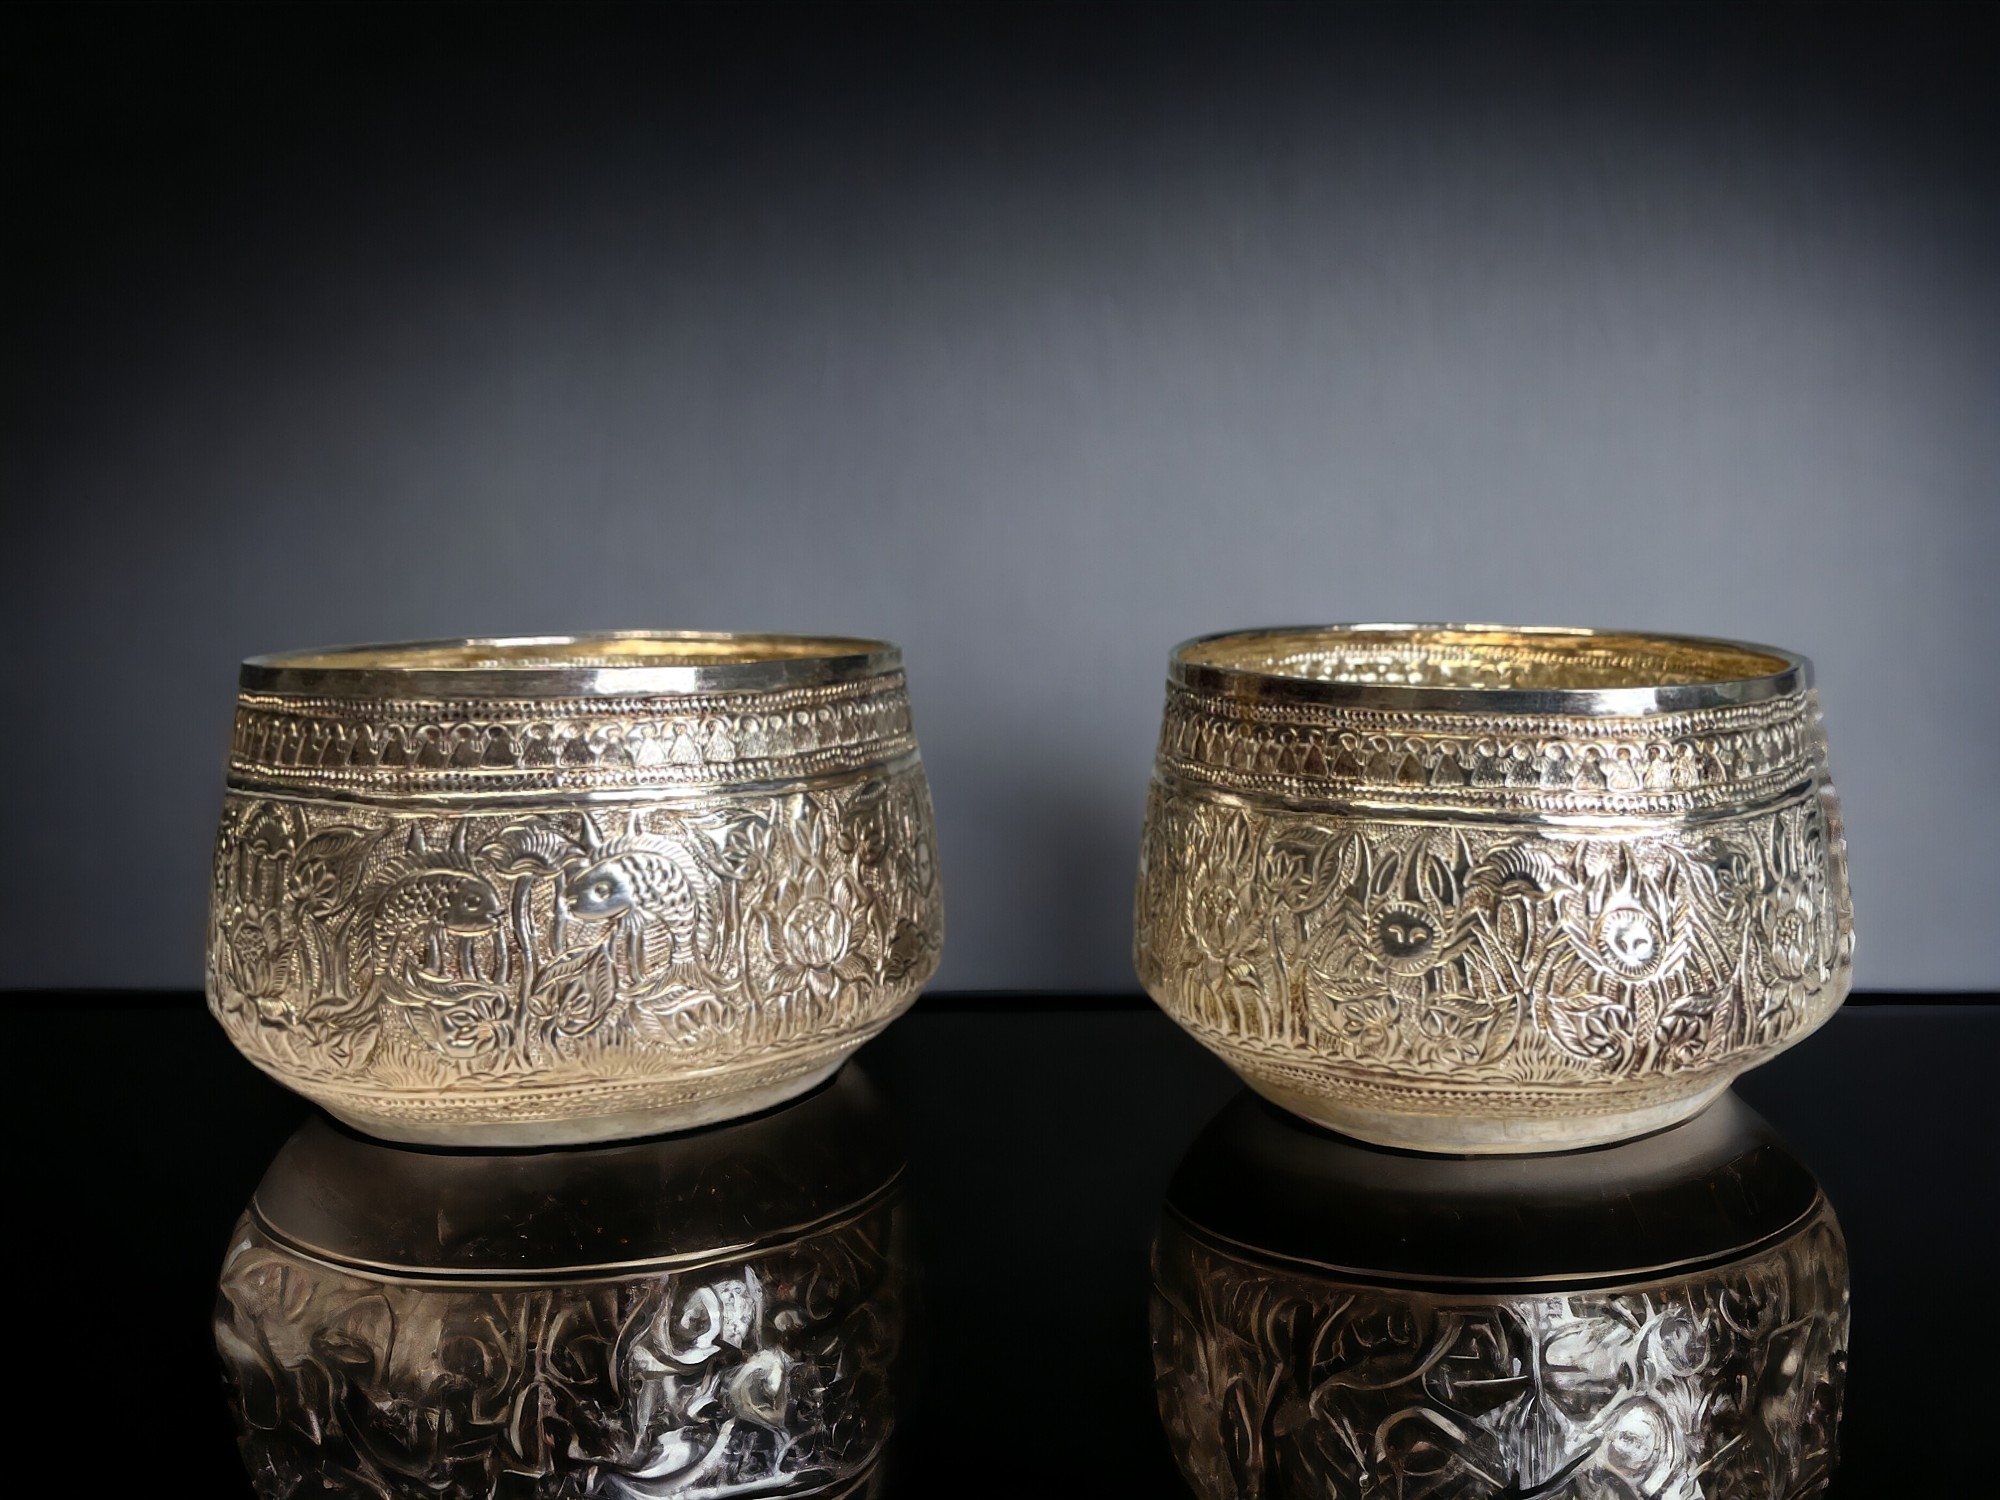 A PAIR OF BURMESE SILVER THABEIK BOWL. Repousse decorated with fish and crabs amongst stylised